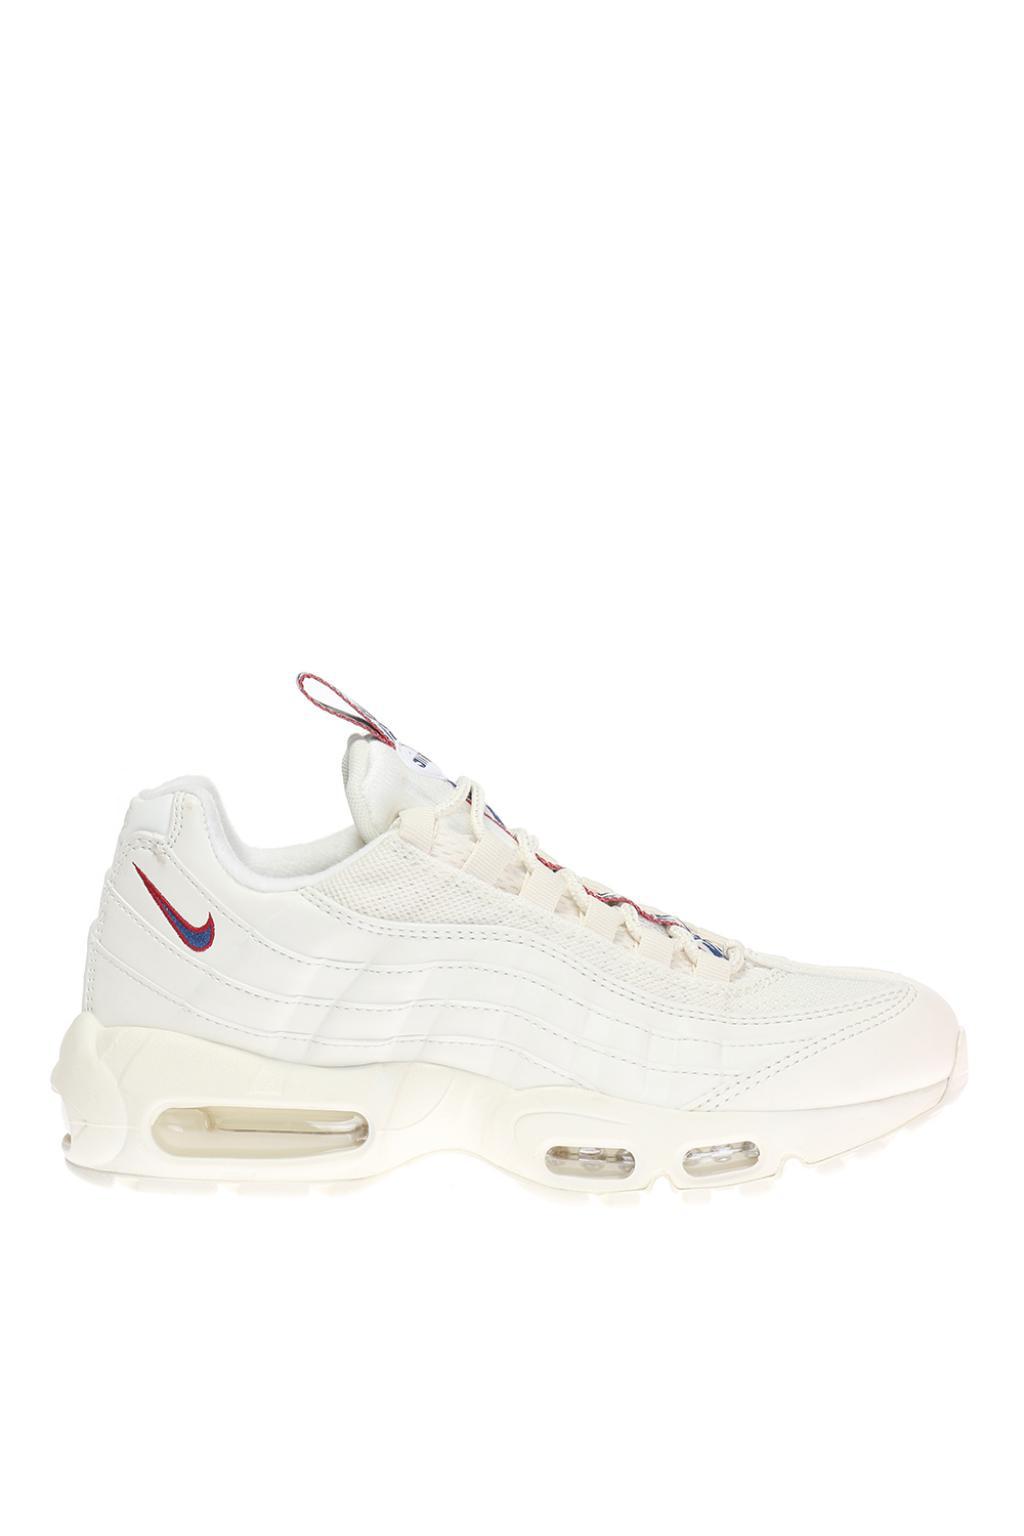 Nike Rubber 'air Max 95 Tt' Sneakers in White for Men - Lyst